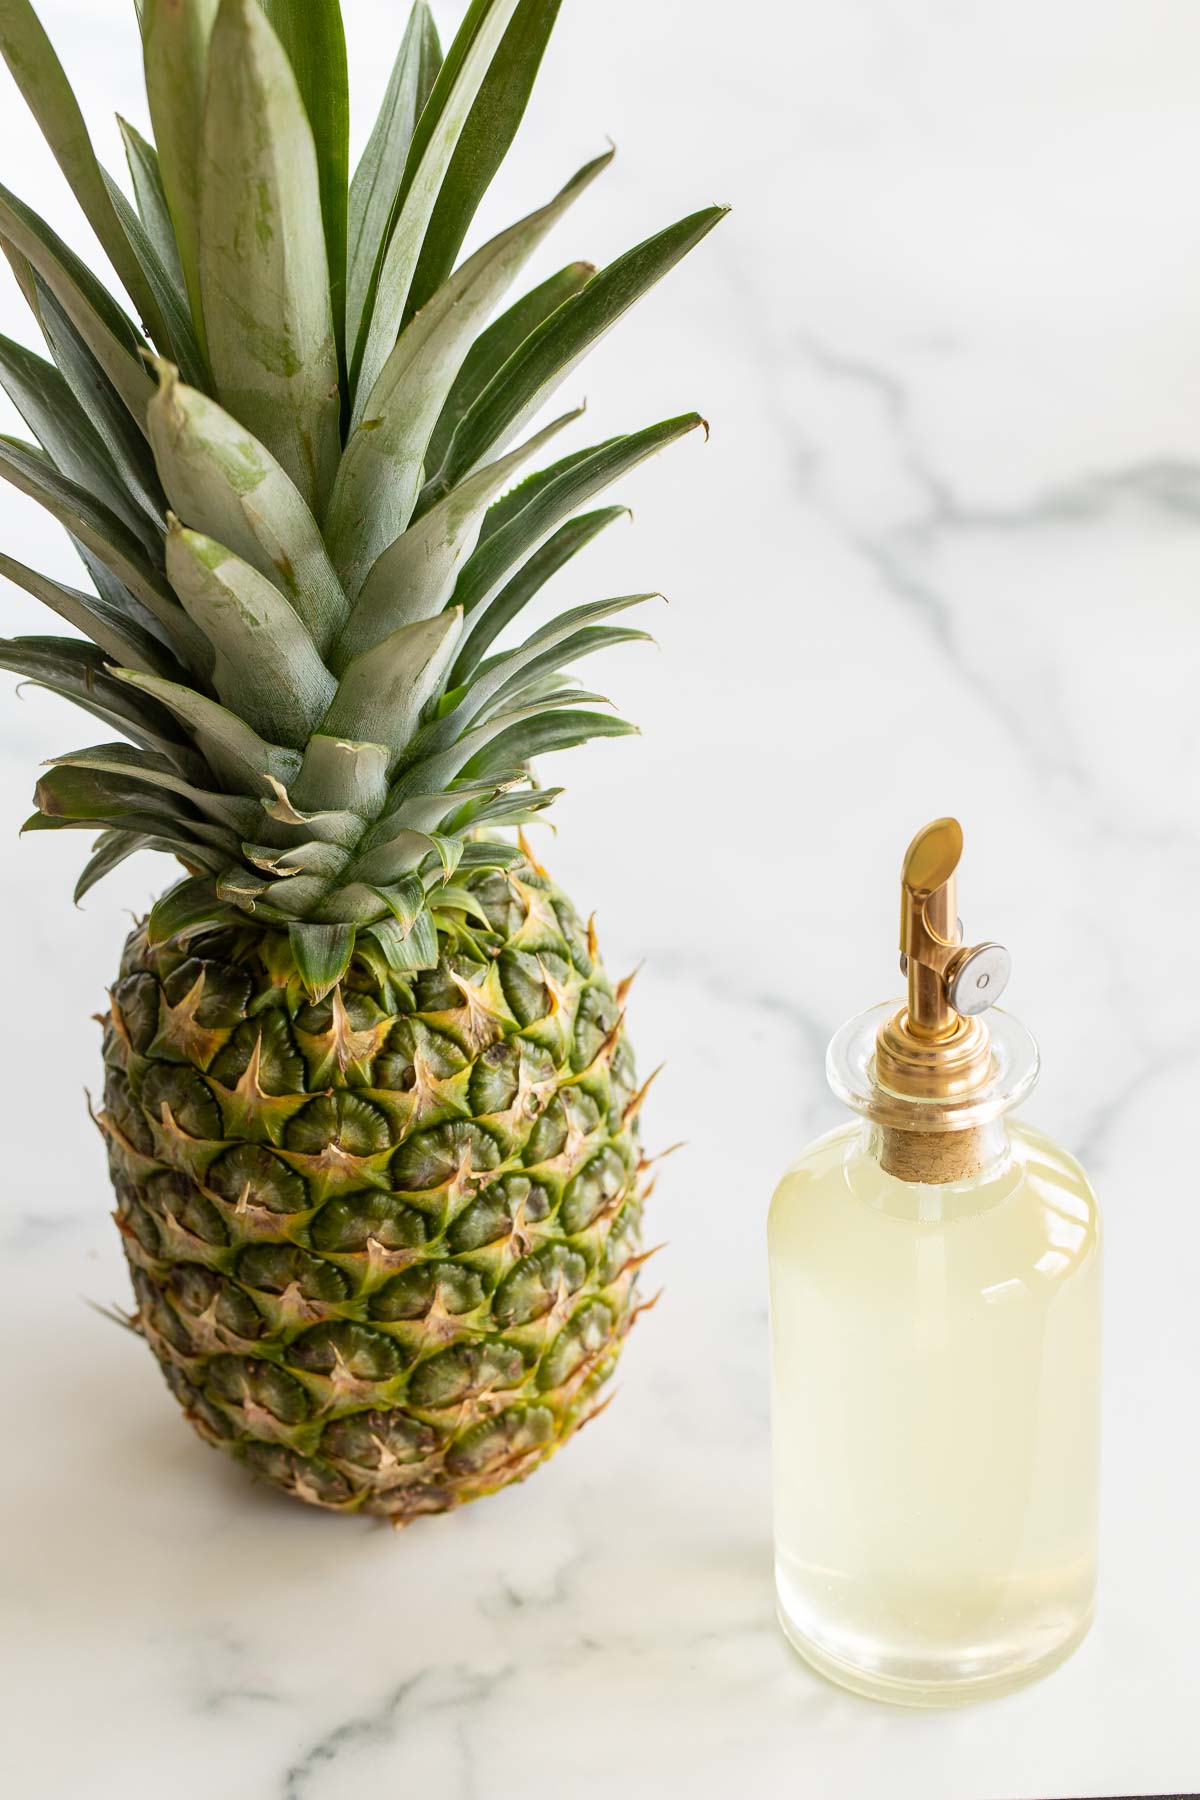 A fresh pineapple on a marble countertop next to a bottle of simple syrup.